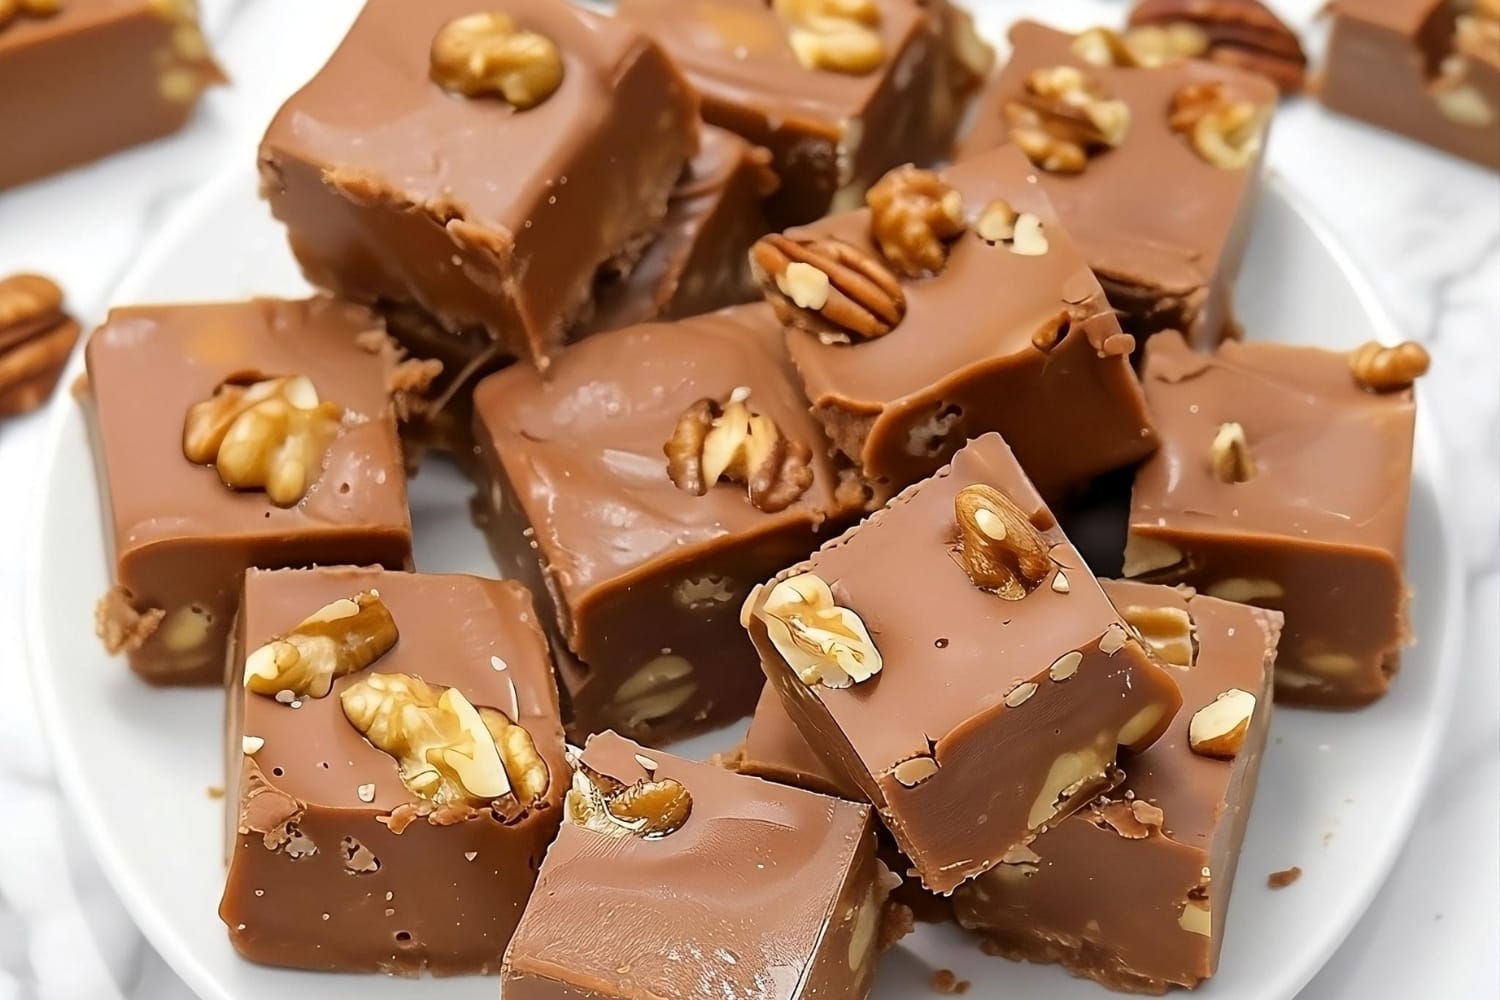 Bunch of marshmallow fluff fudge with walnuts in a white plate.